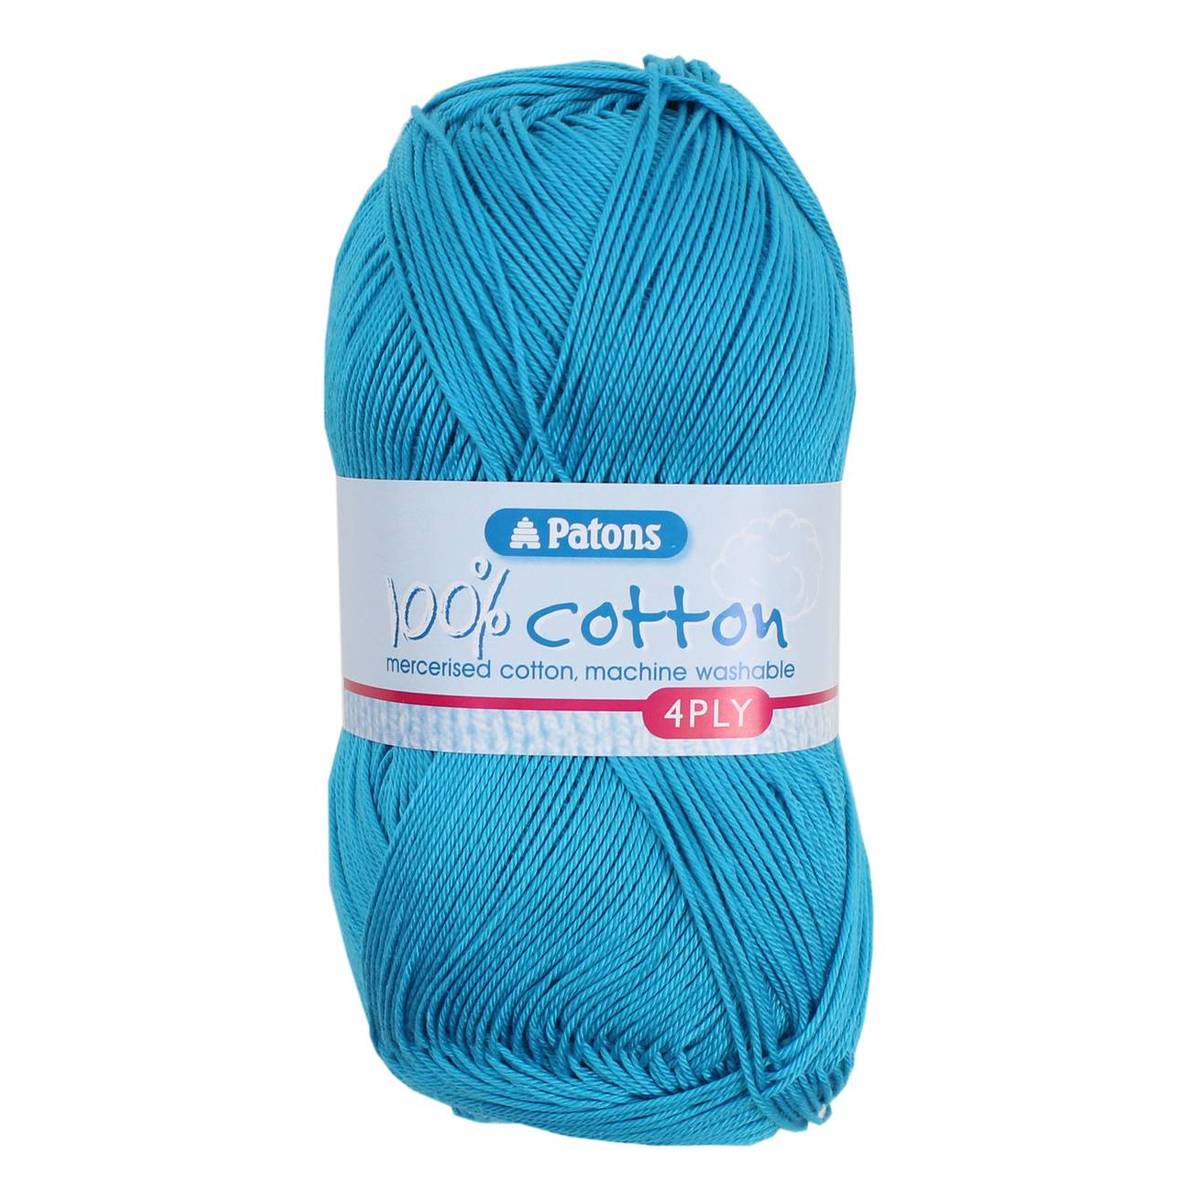 Patons Peacock 100% Cotton 4 Ply 100g | Hobbycraft